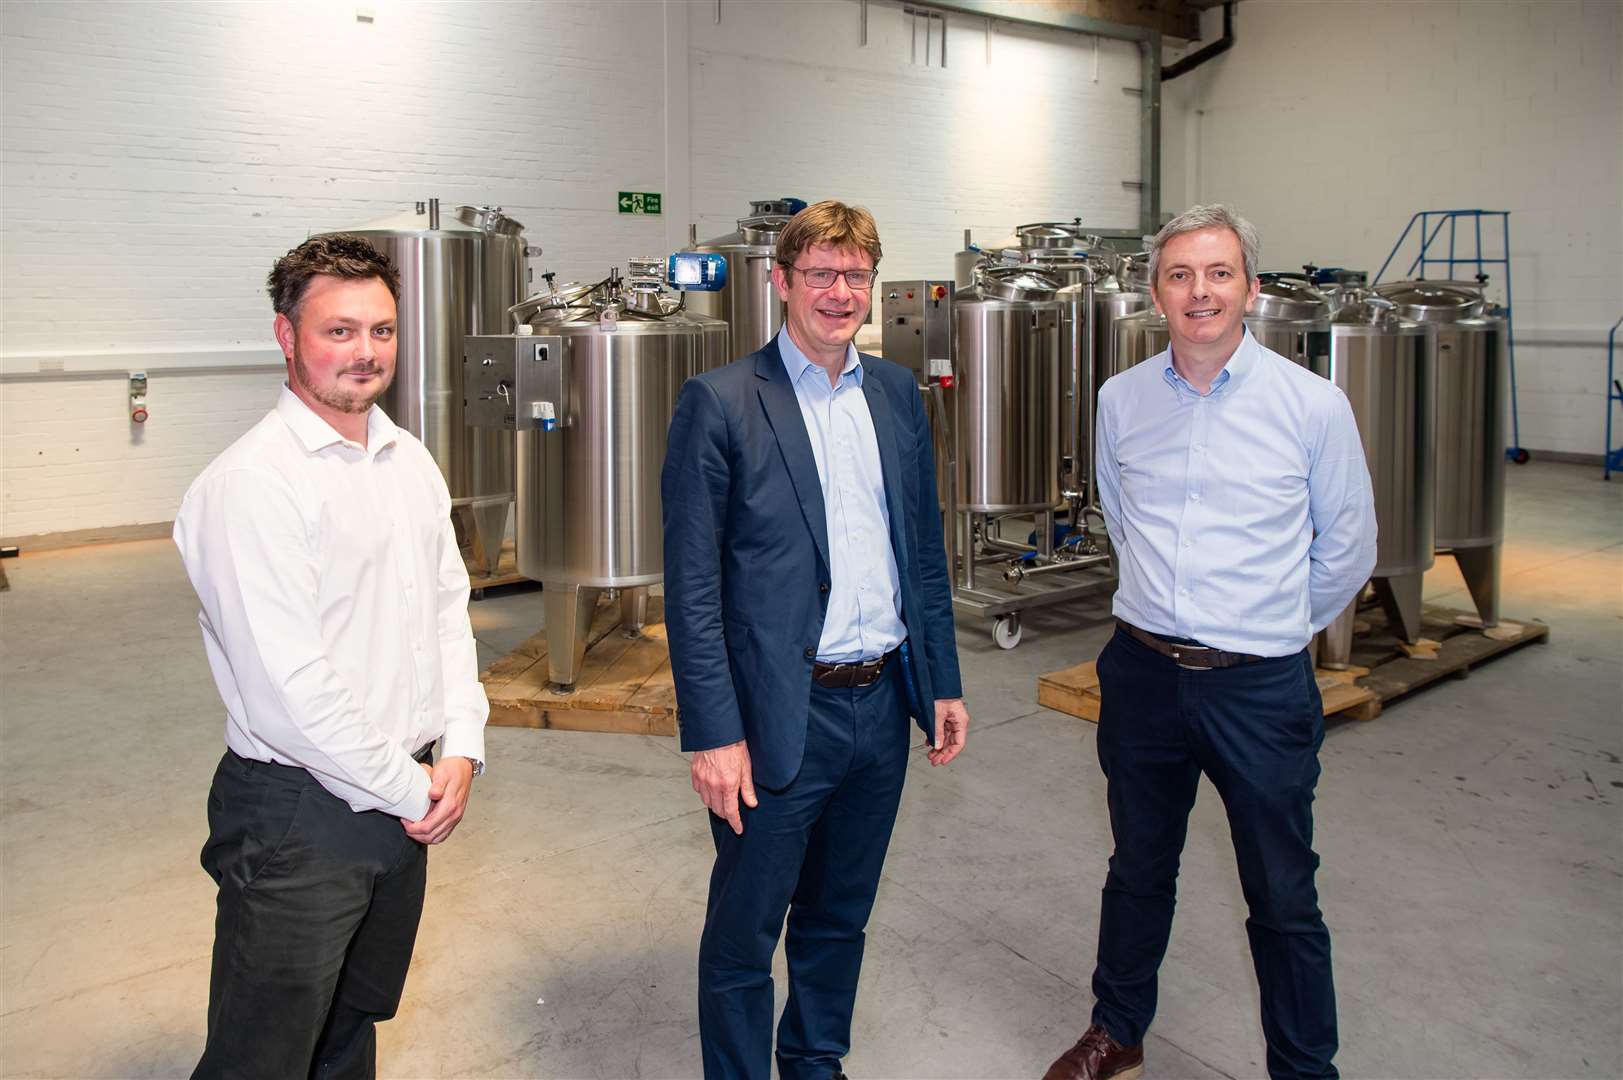 Warehouse manager Nathan Biginton with Greg Clark, MP, and managing director Colin Wilson